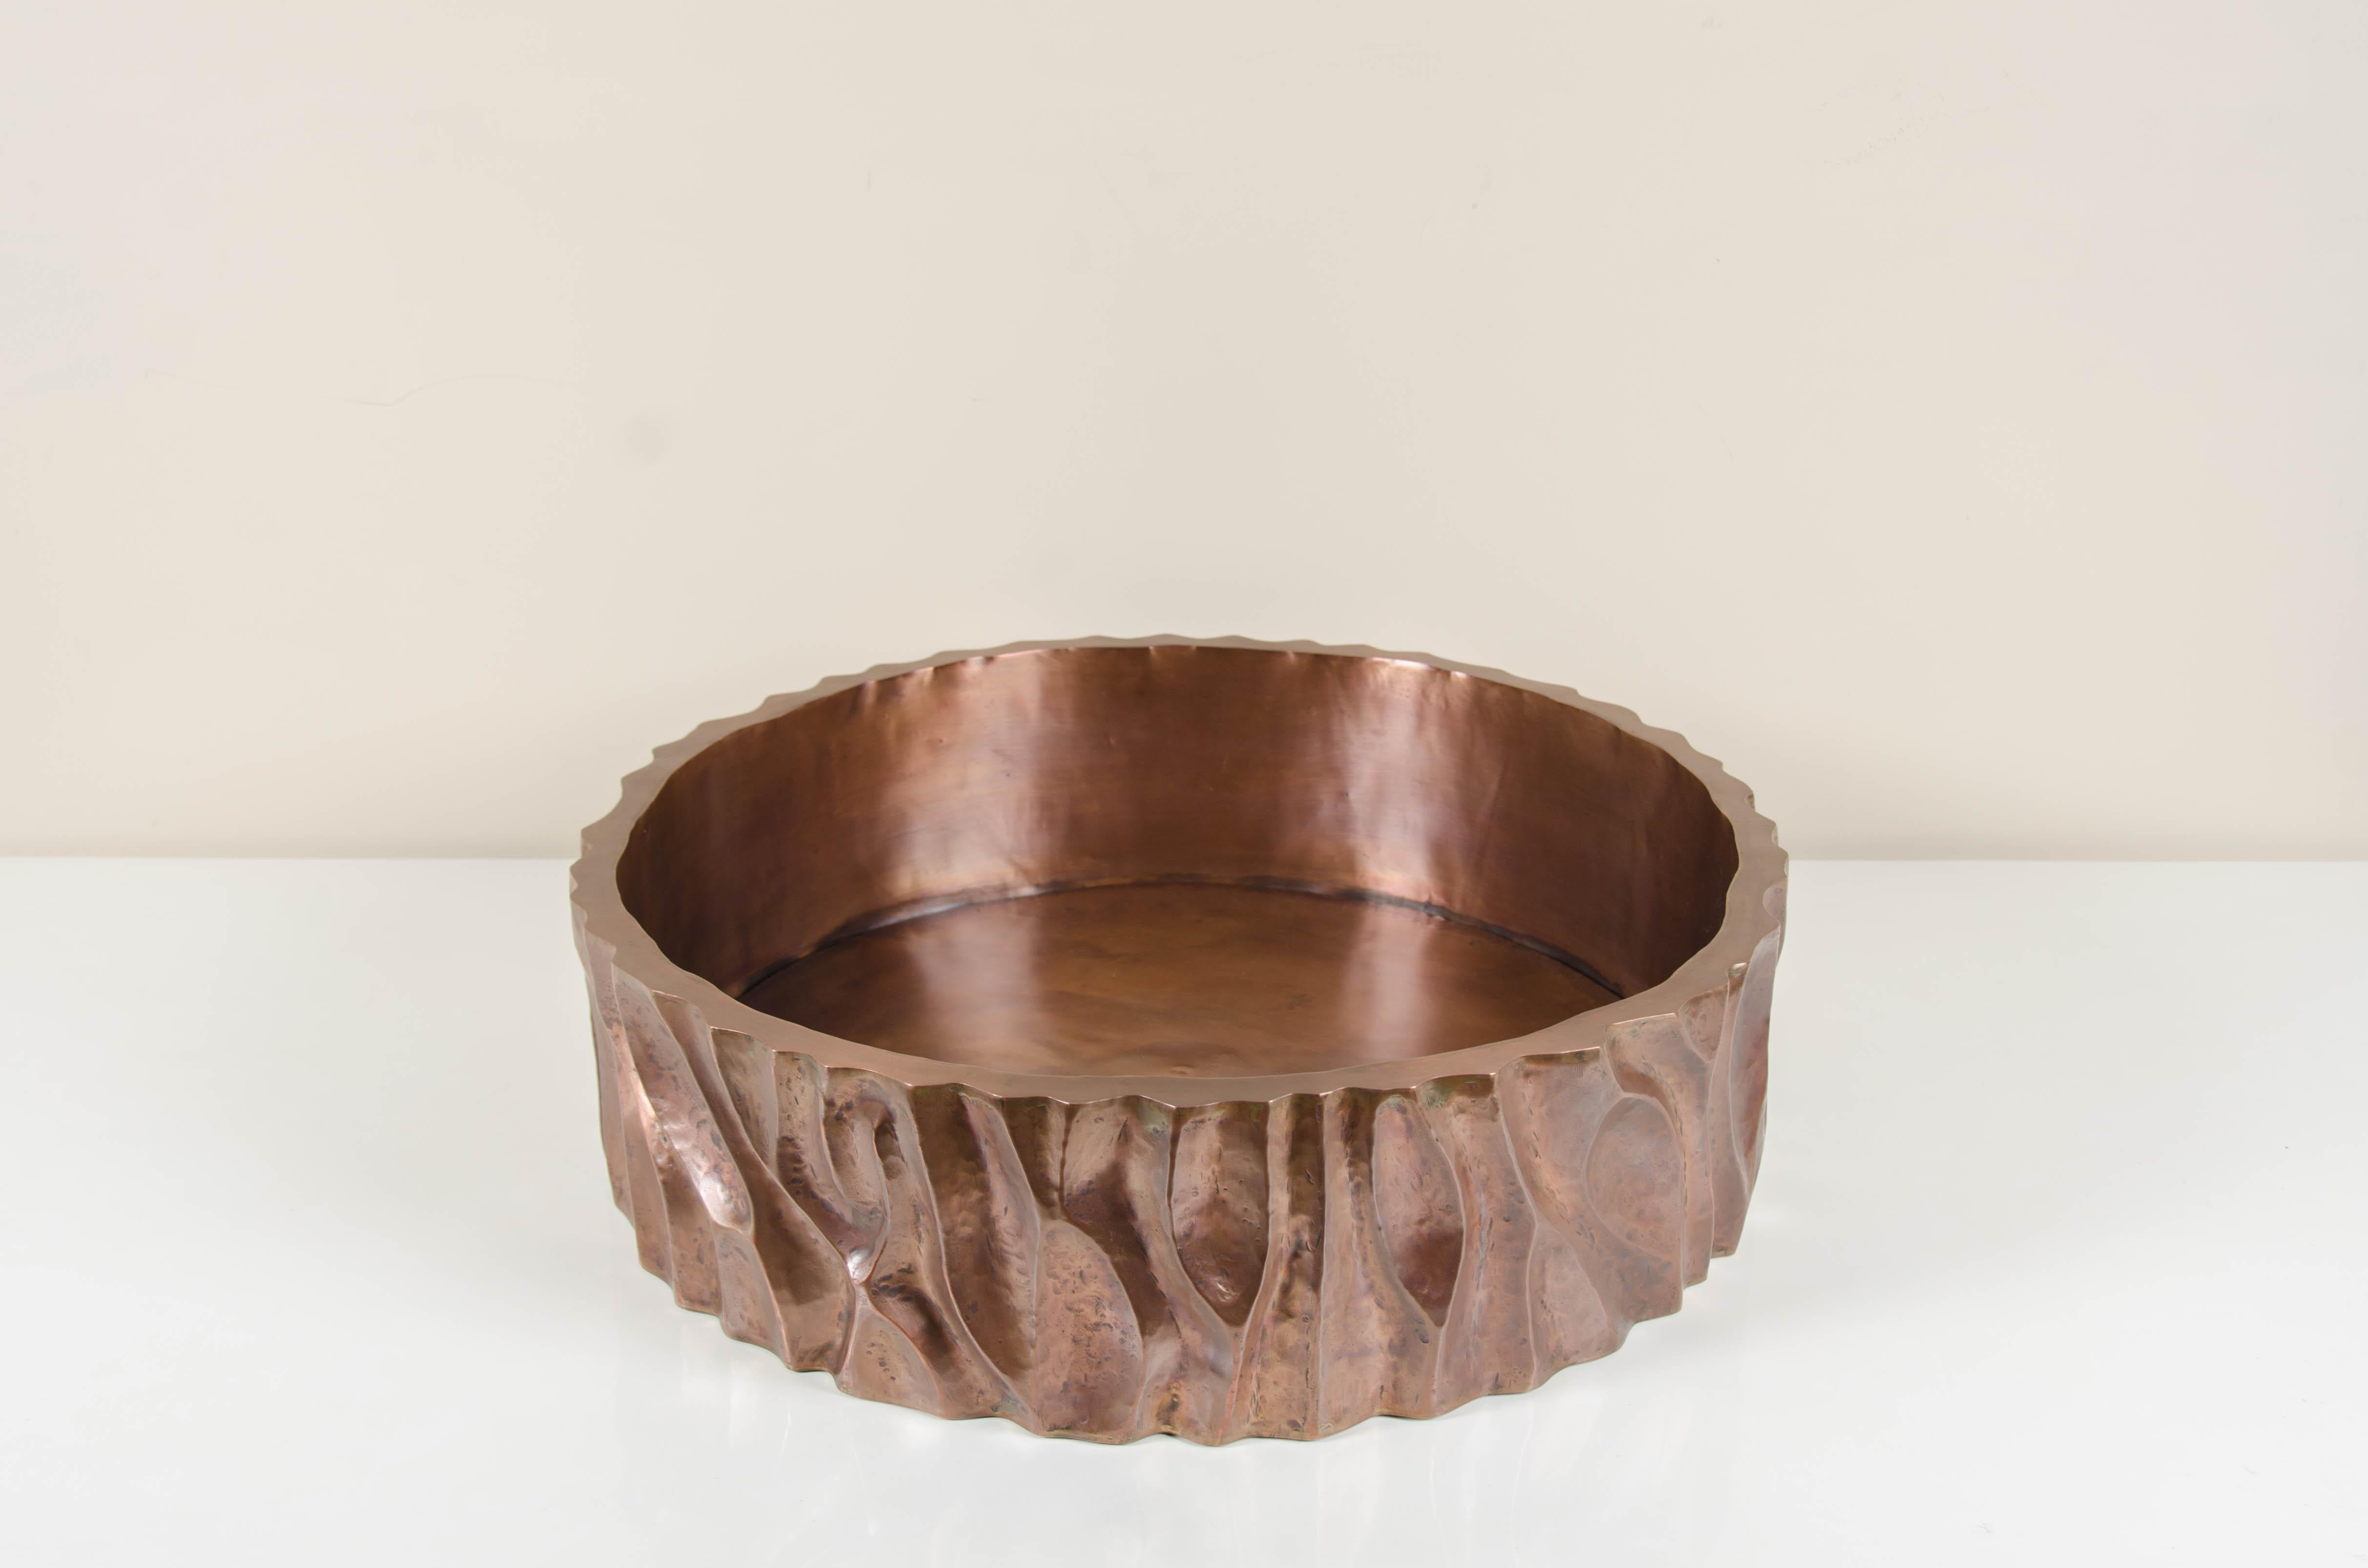 Repoussé Low Tree Trunk Cachepot, Antique Copper by Robert Kuo, Limited Edition For Sale